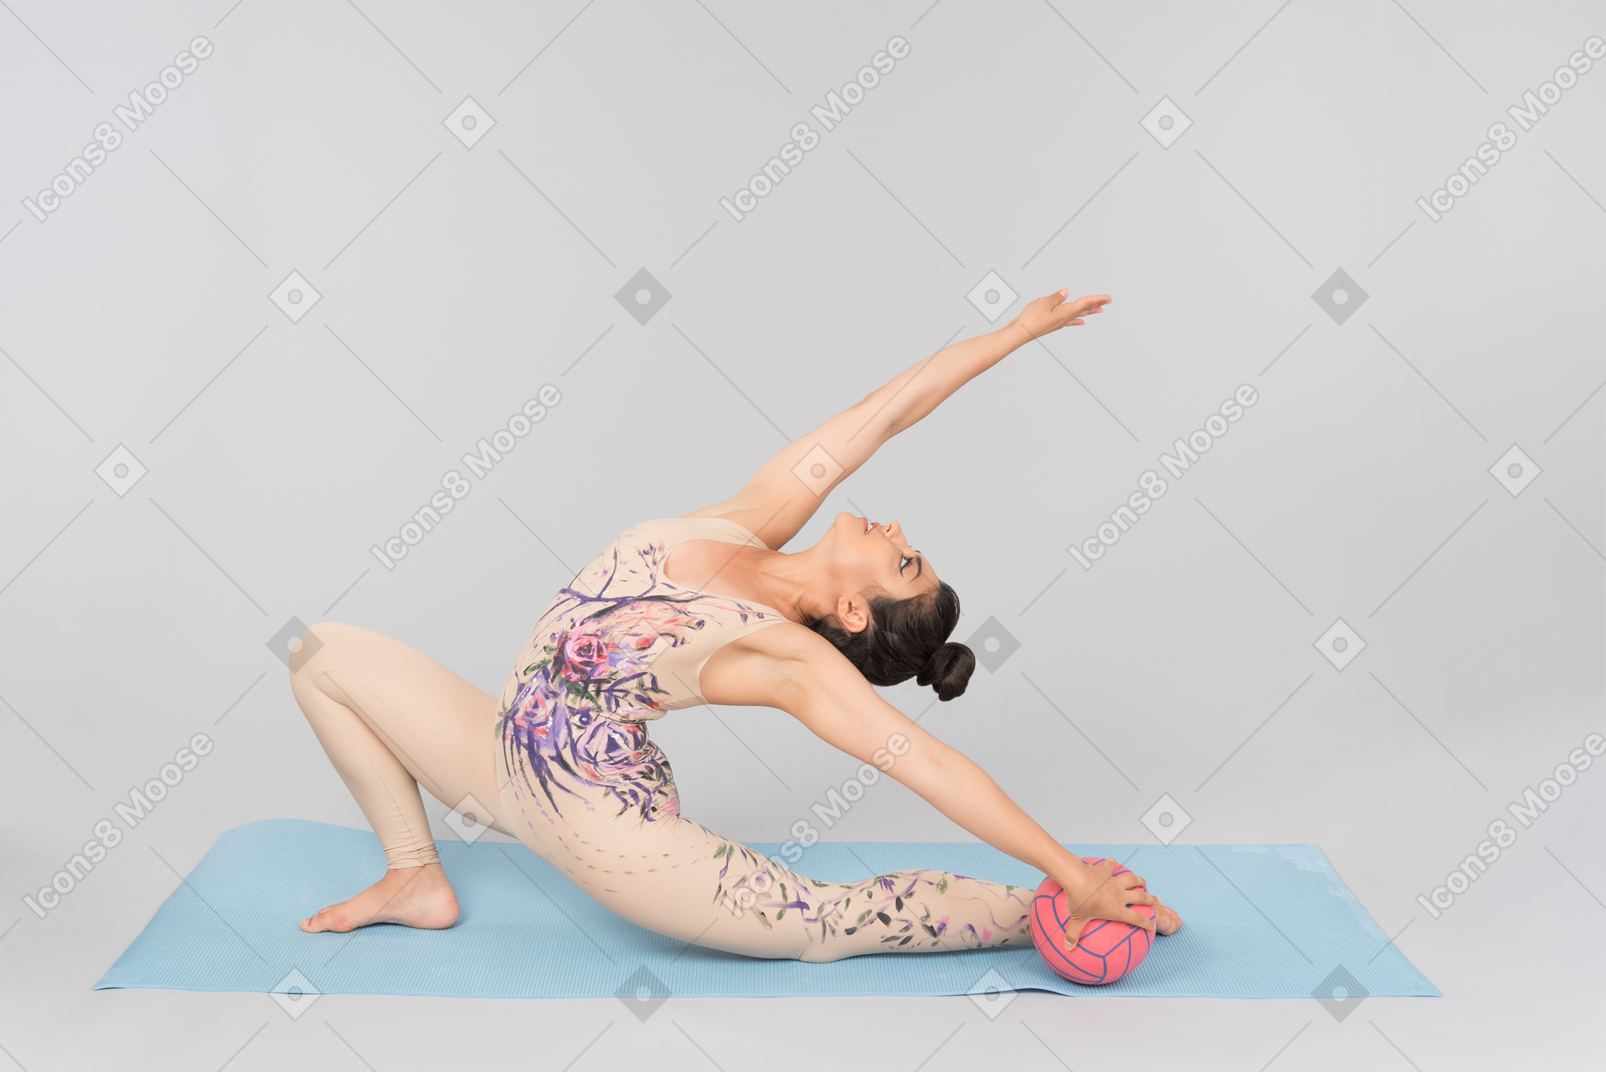 Young indian gymnast stretching herself sitting on yoga mat